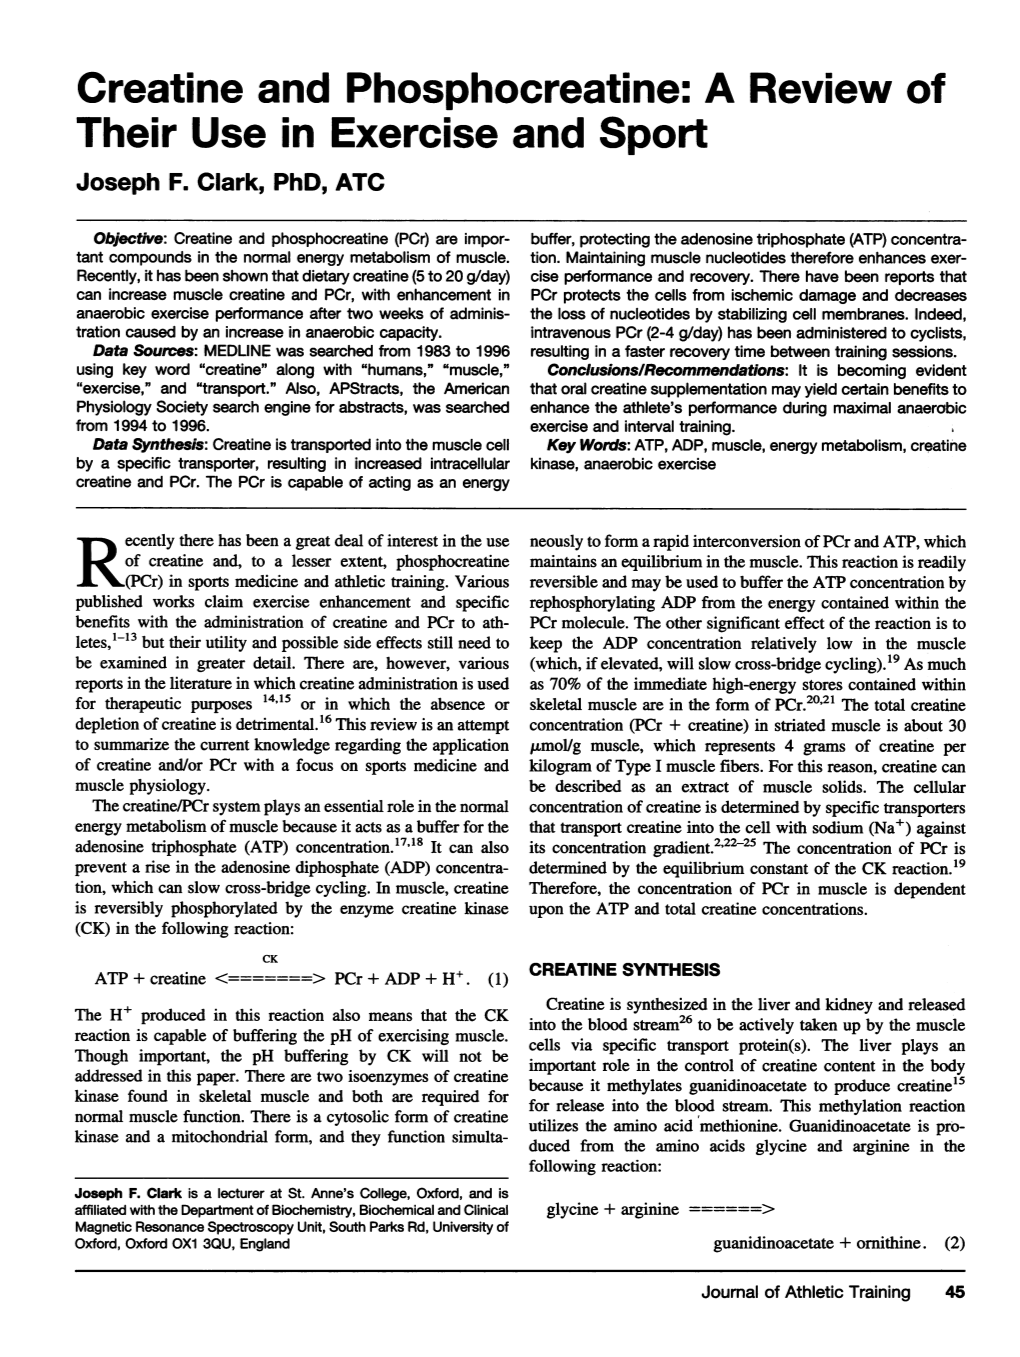 Creatine and Phosphocreatine: a Review of Their Use in Exercise and Sport Joseph F